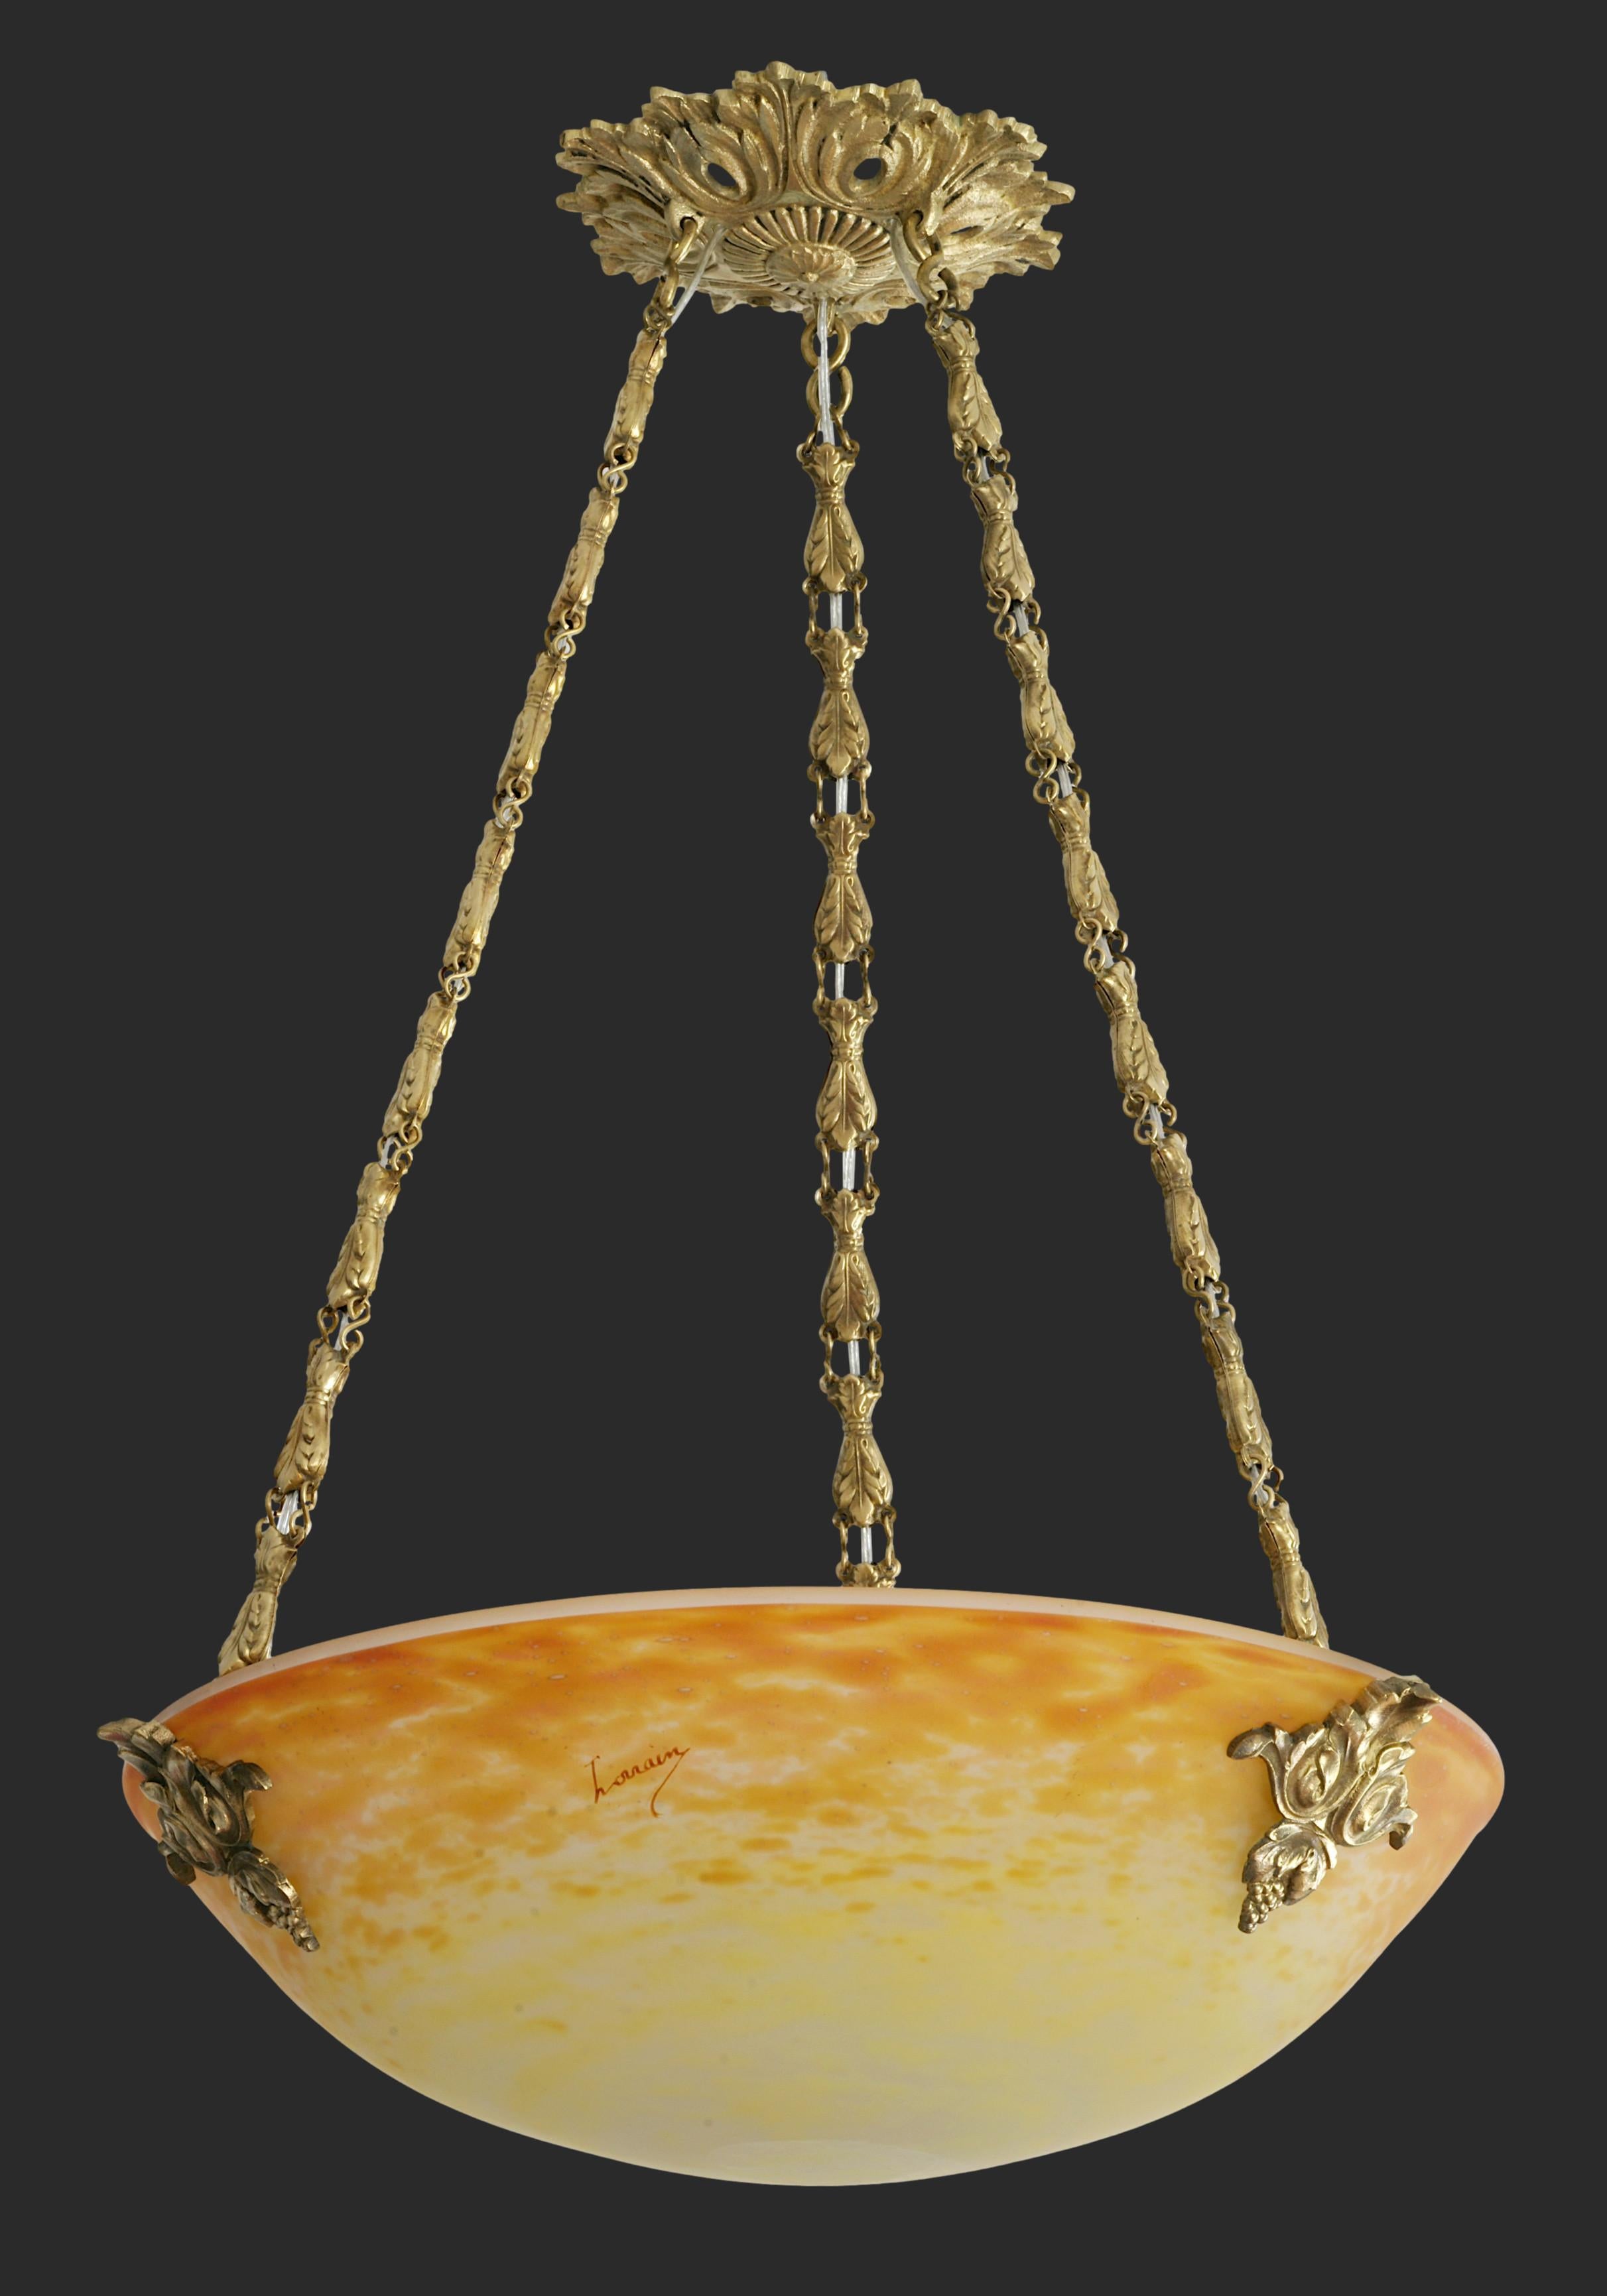 French Art Deco pendant chandelier by Daum (Croismare), France, late 1920s. Blown double glass shade by Daum hung at its bronze and brass fixture. Measure: Height : 20